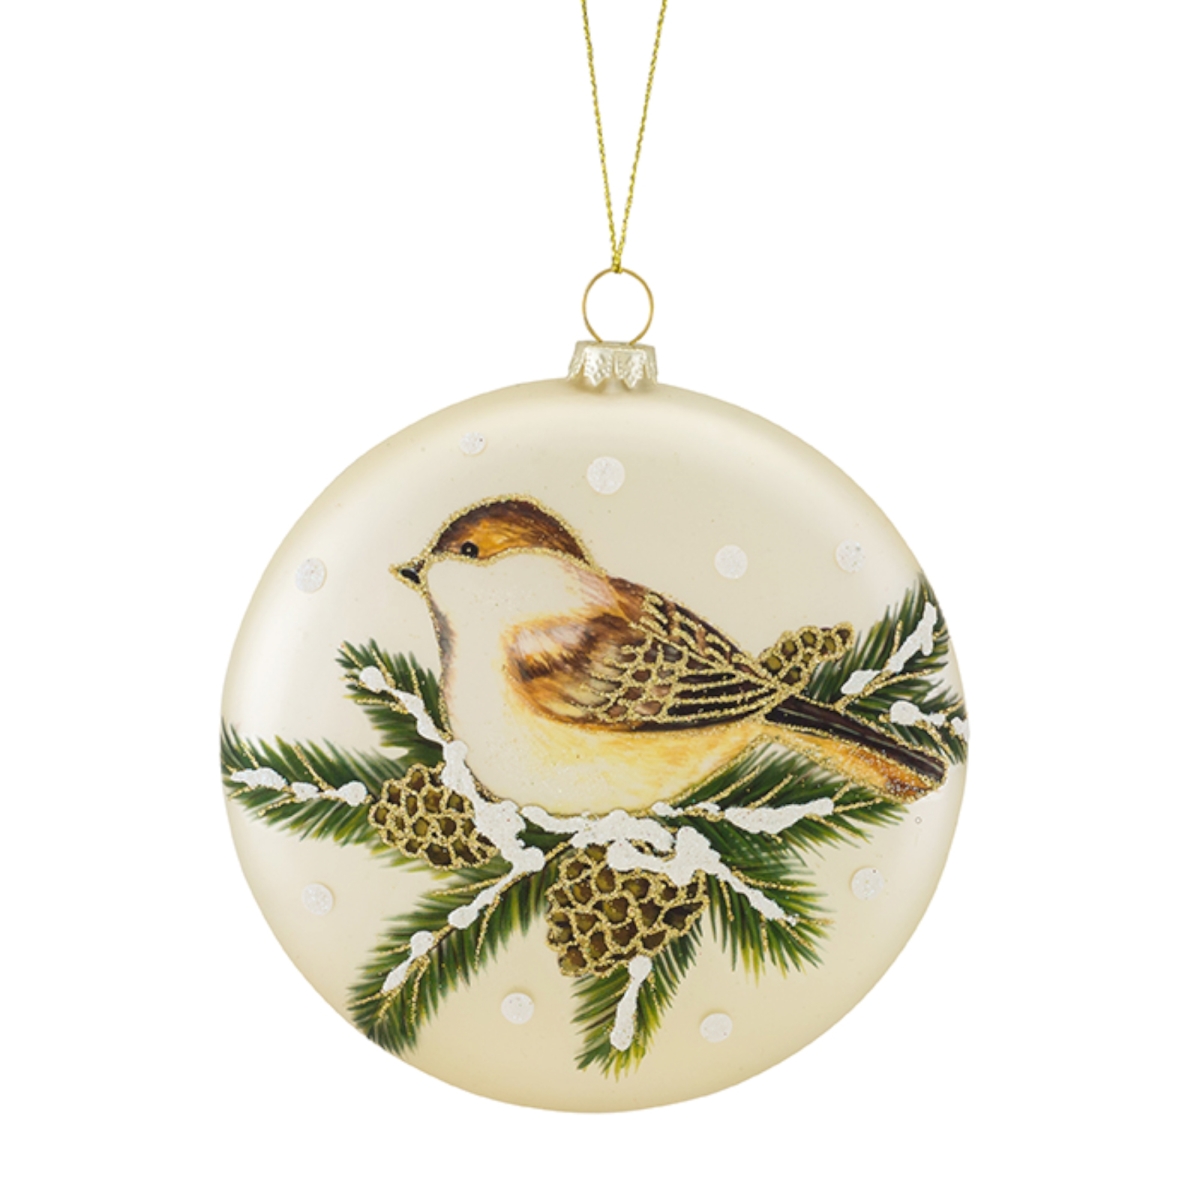 72861ds 5.5 In. Glass Bird Pine Disc Ornament, Green & Brown - Set Of 12